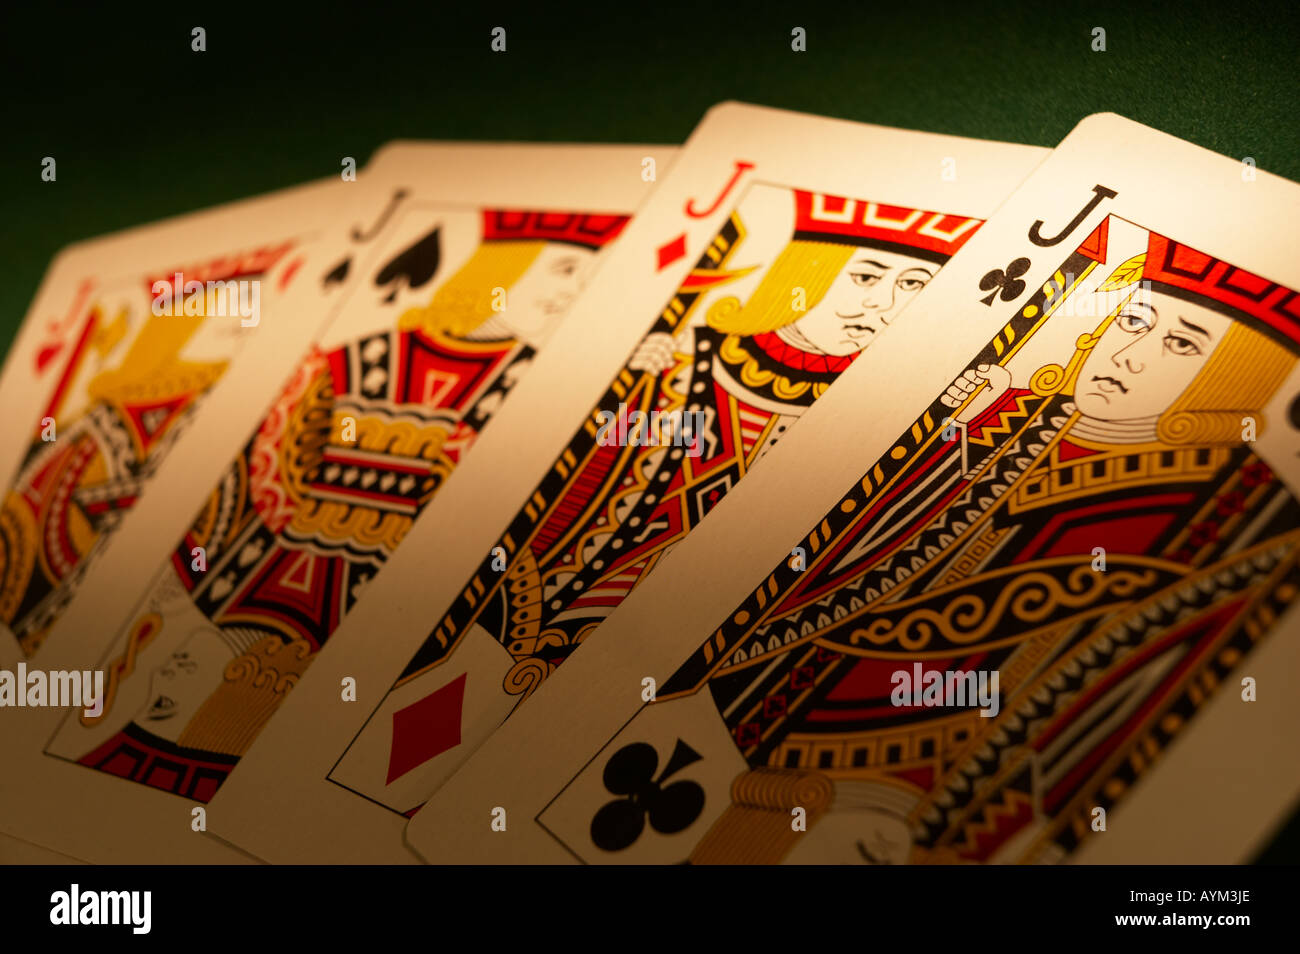 HAND OF PLAYING CARDS DISPLAYING FOUR JACKS ON GREEN CLOTH GAMING TABLE Stock Photo